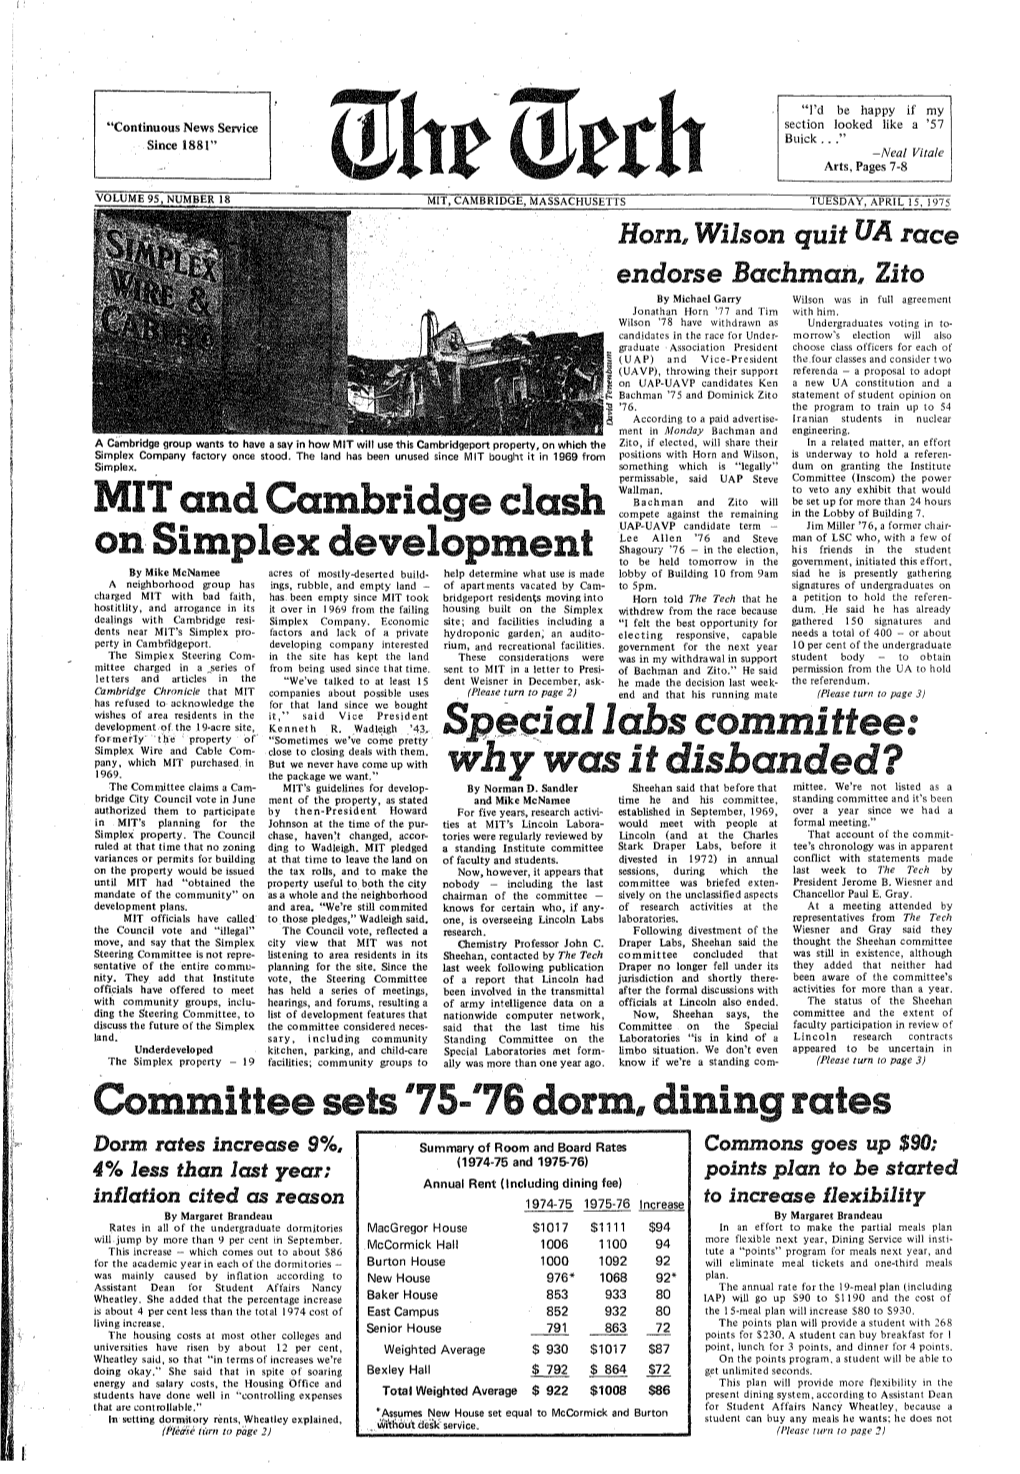 S It Disbanded ? the Committee Claims a Cam-- MIT's Guidelines for Develop- by Norman D